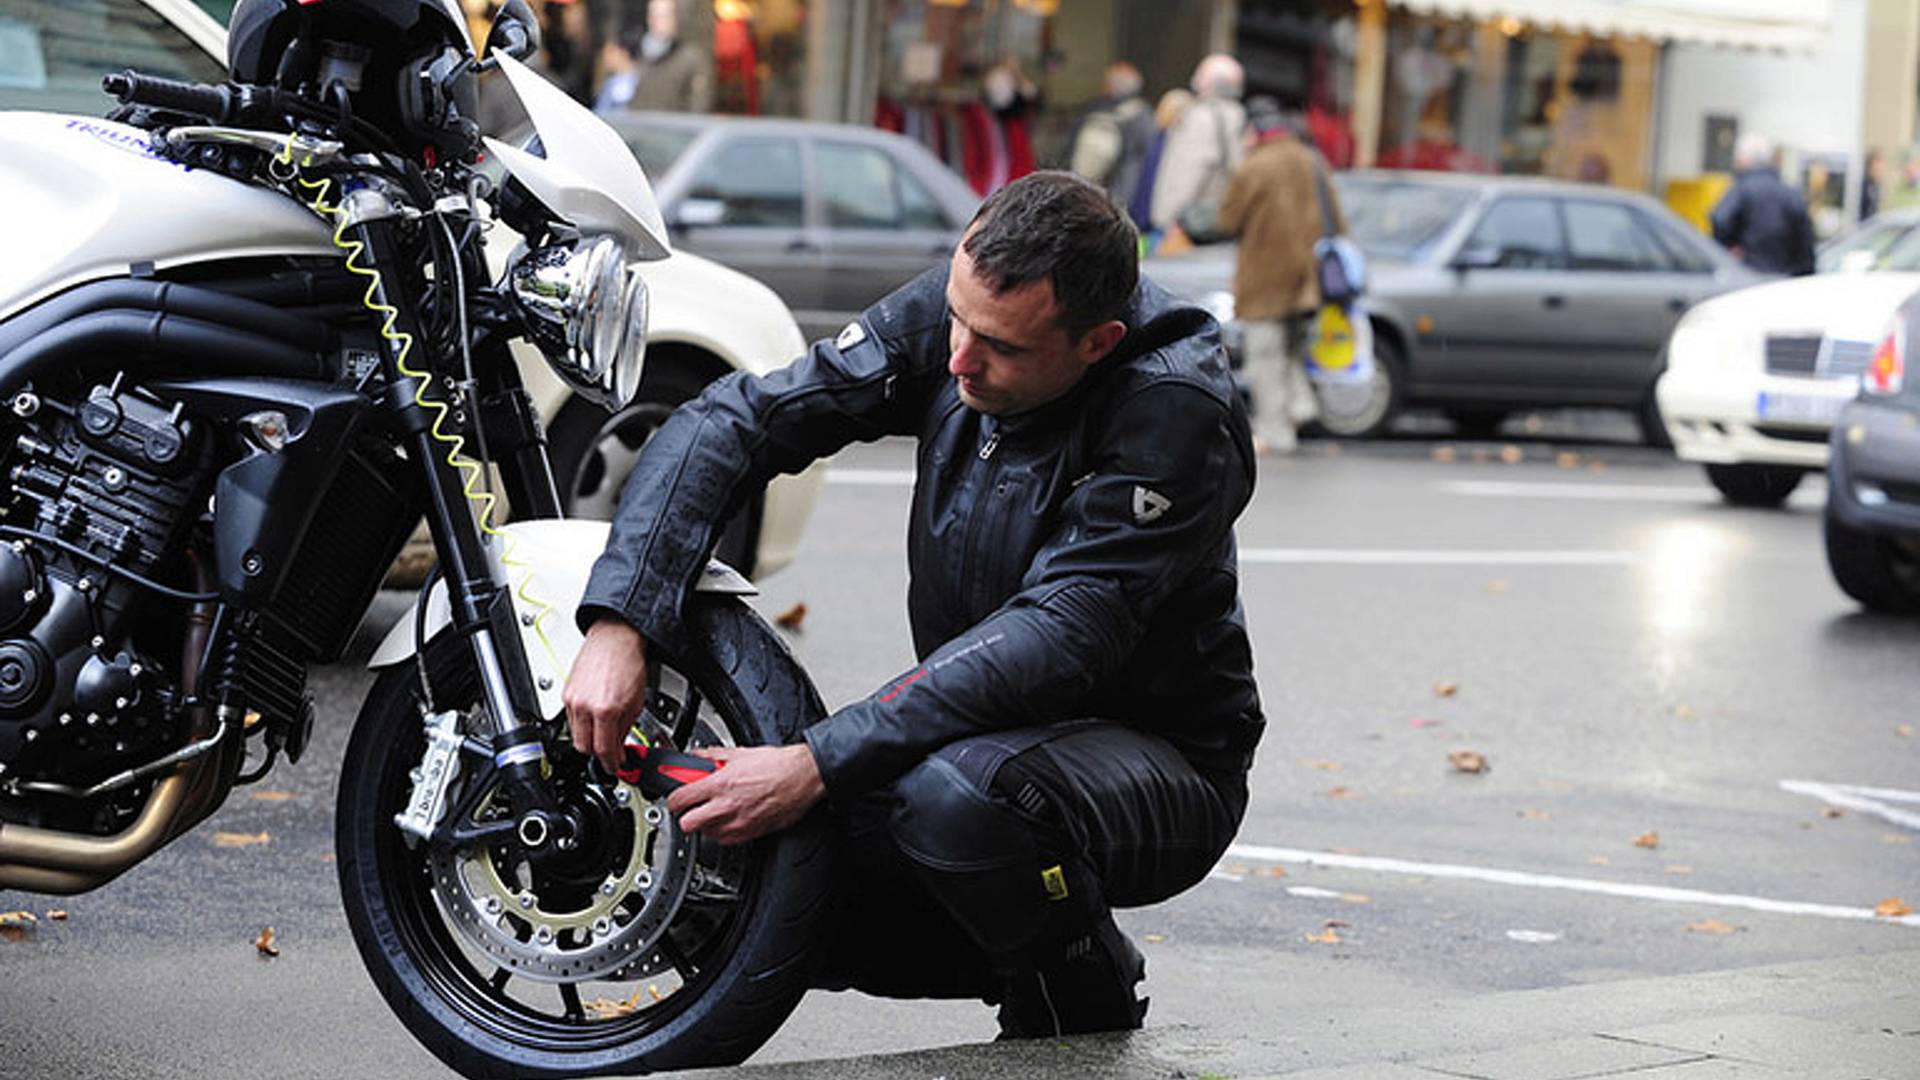 A rider securing a bike lock on the front wheel. Media sourced from RideApart.